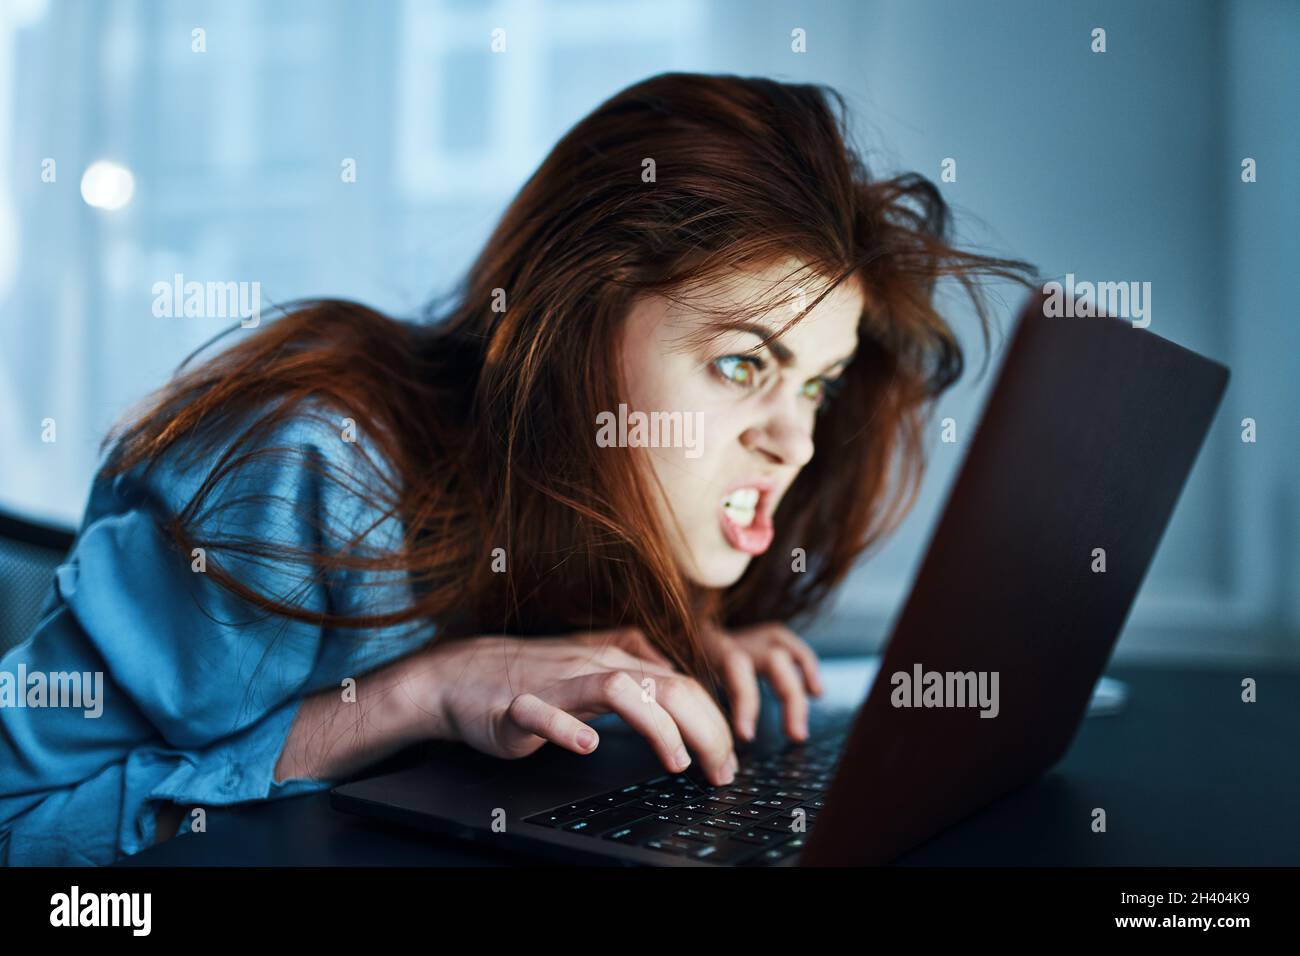 emotional woman in front of laptop at night work disorder Stock Photo